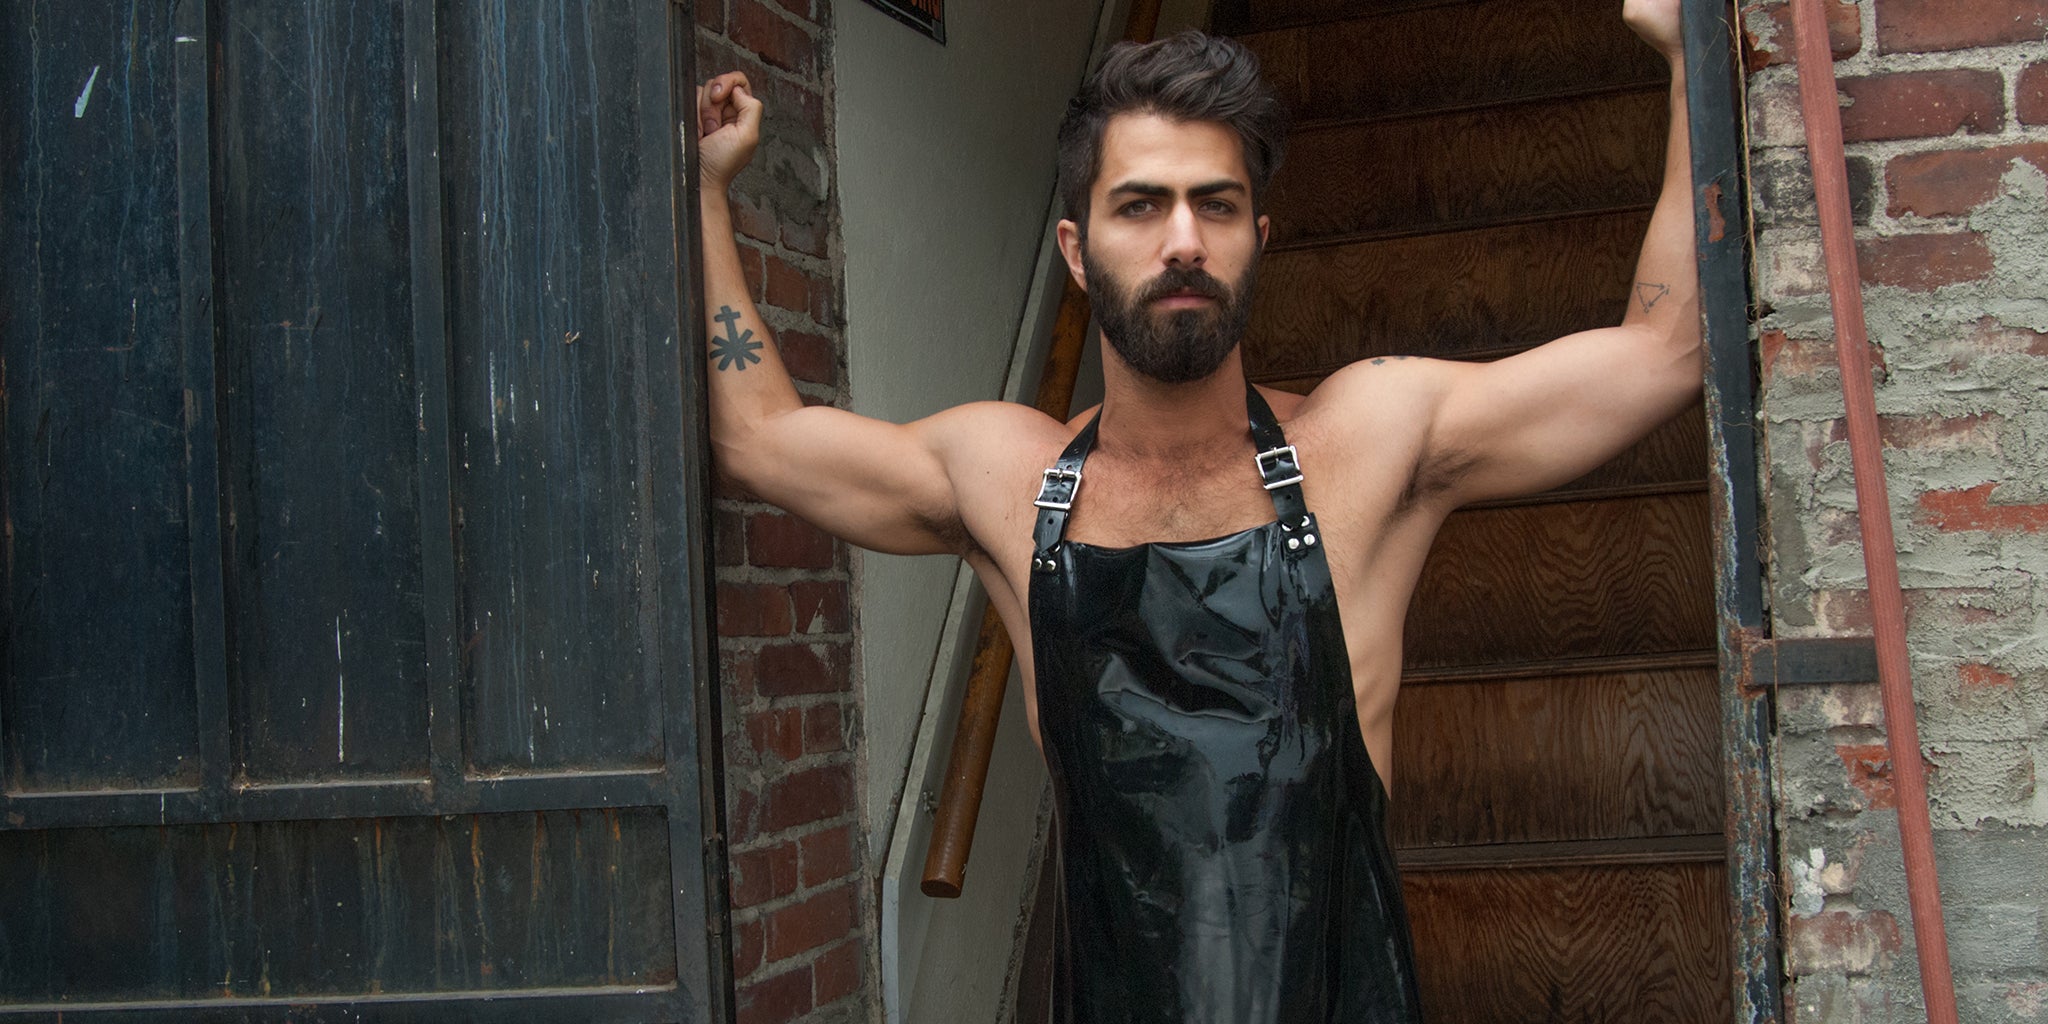 A brunette man is shown from the hips upward, standing in a doorway. He is shirtless and wears the black Rubber Apron from the Stockroom.